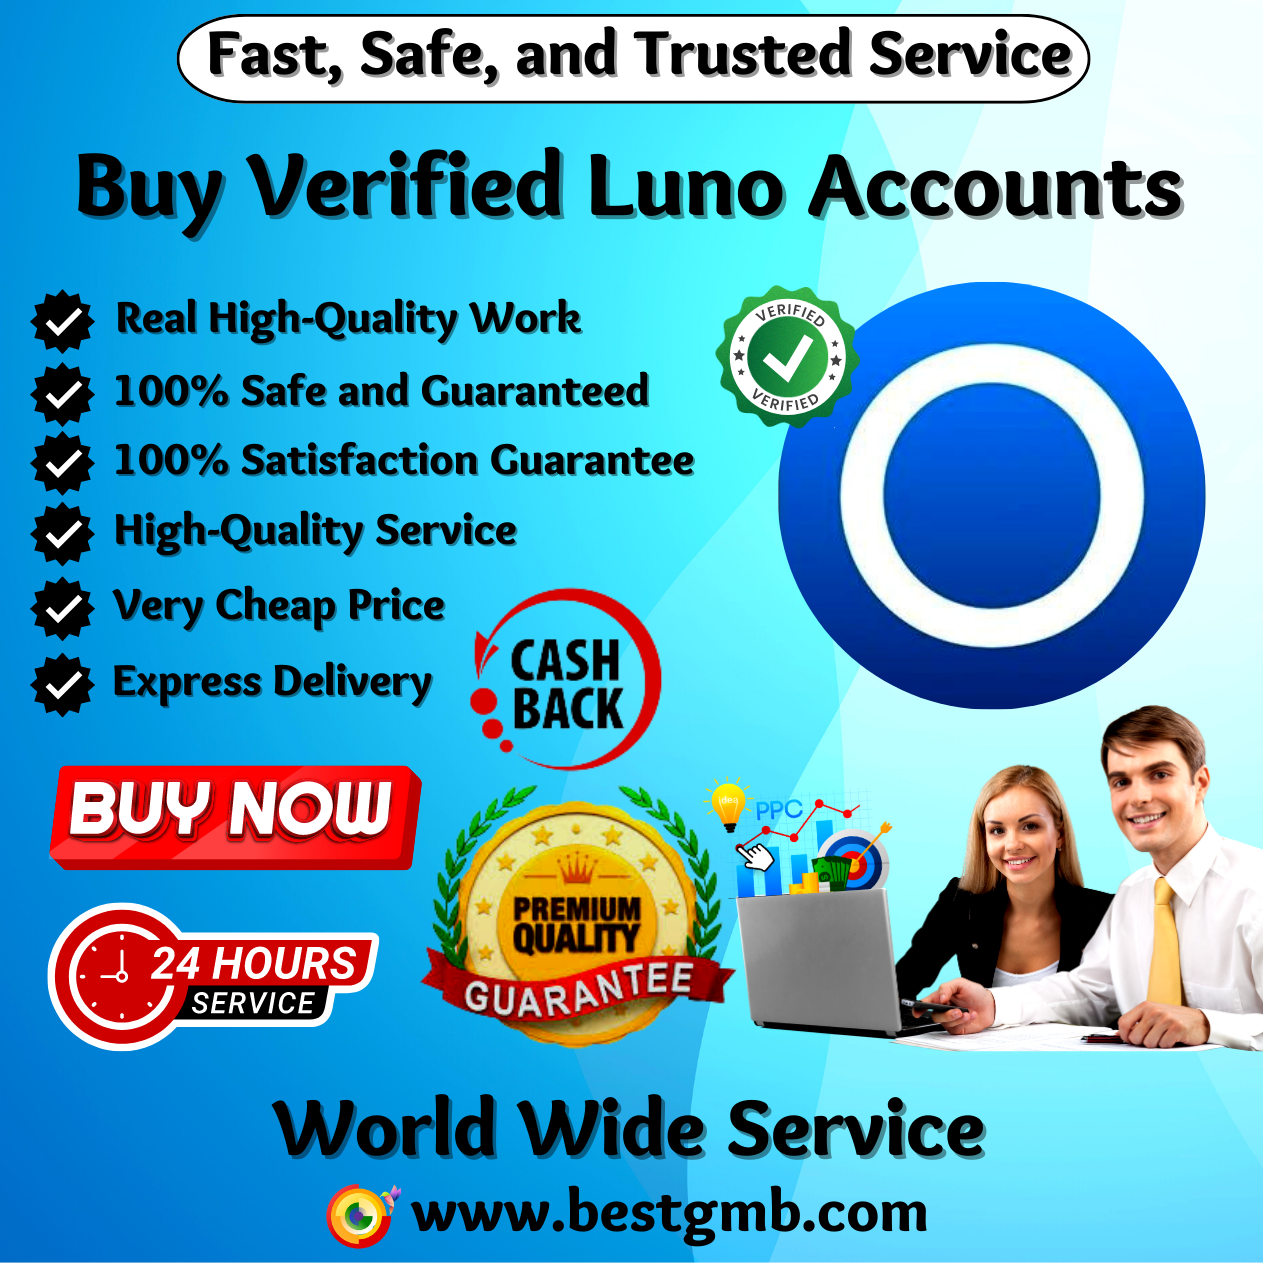 Buy Verified Luno Accounts - With Documents